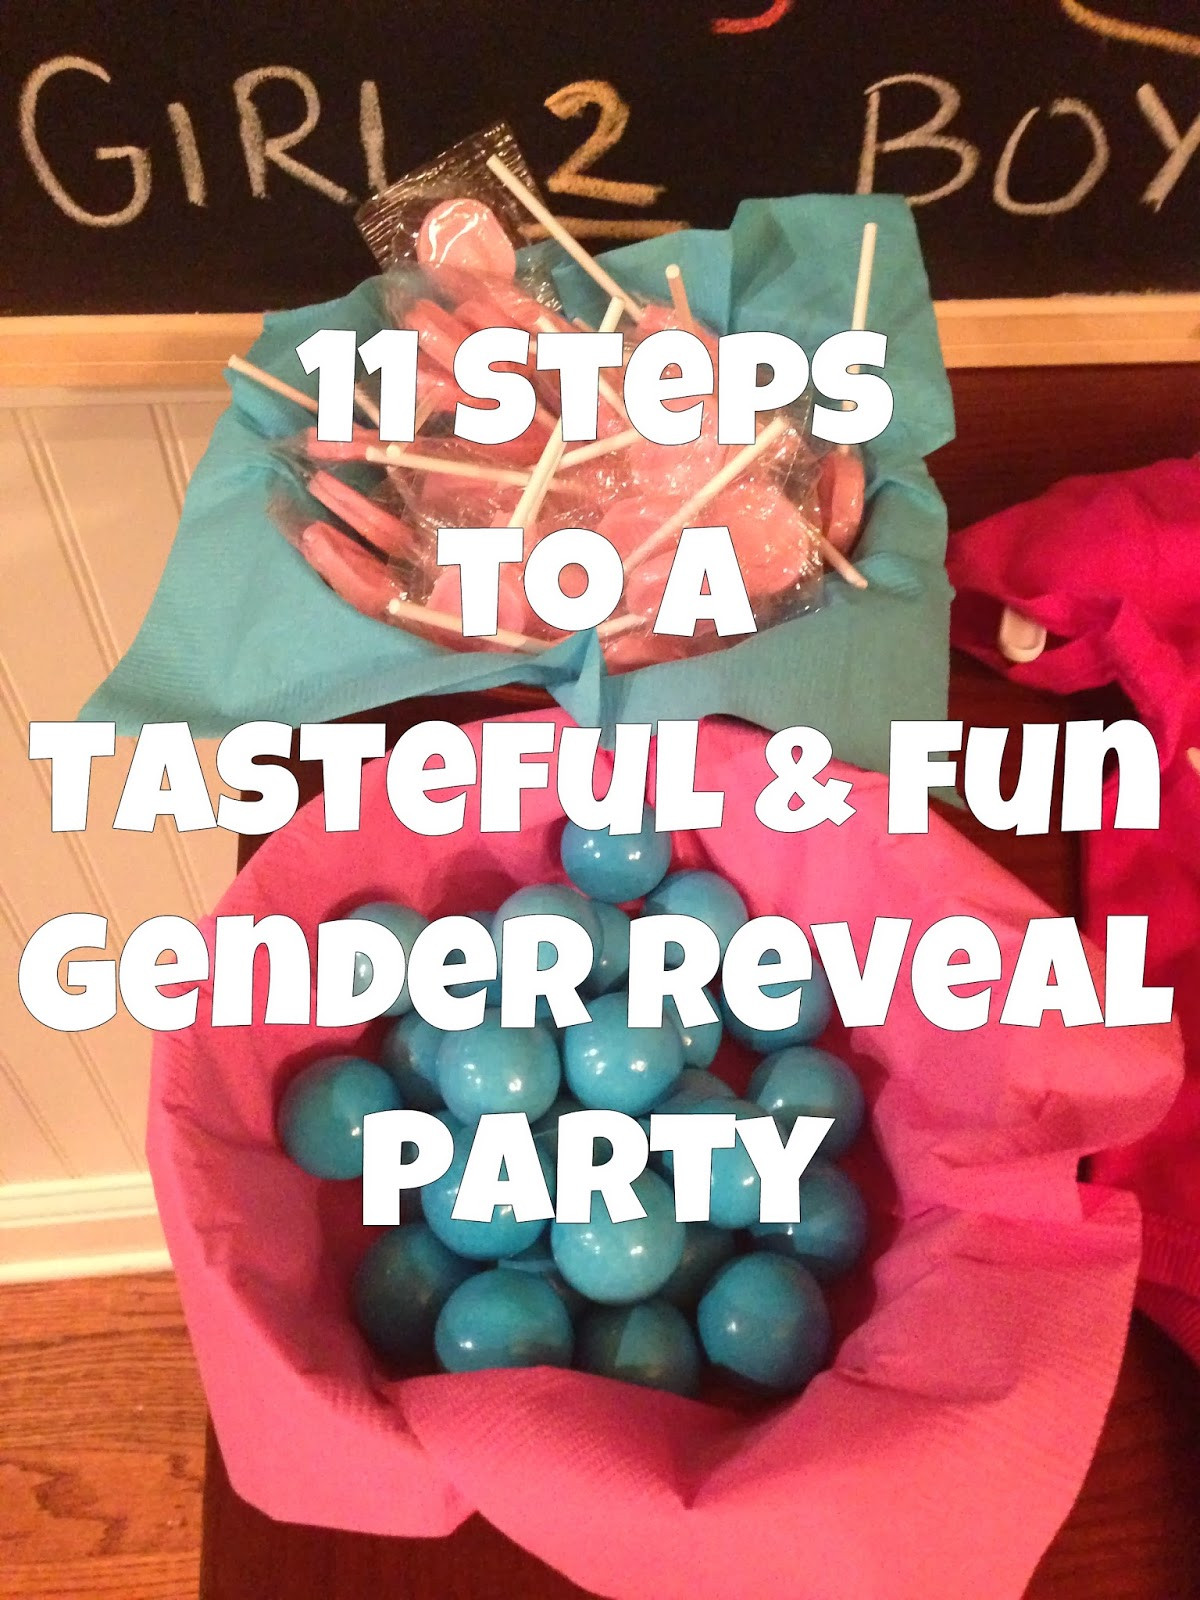 Cool Ideas For Gender Reveal Party
 Mother to Kings 11 Steps to a Tasteful & Fun Gender